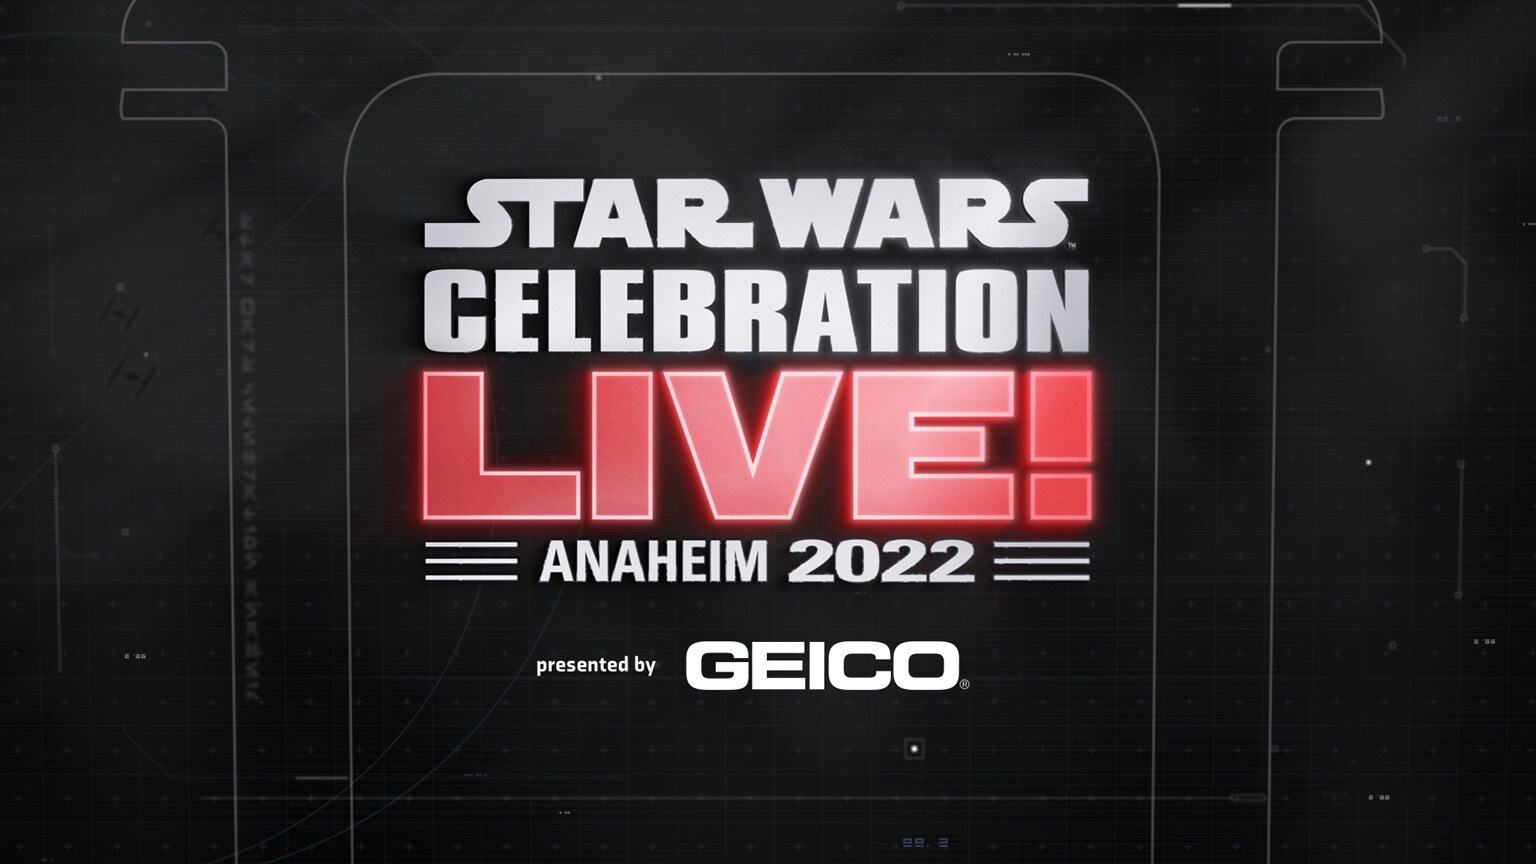 How to Experience Star Wars Celebration Anaheim 2022 at Home